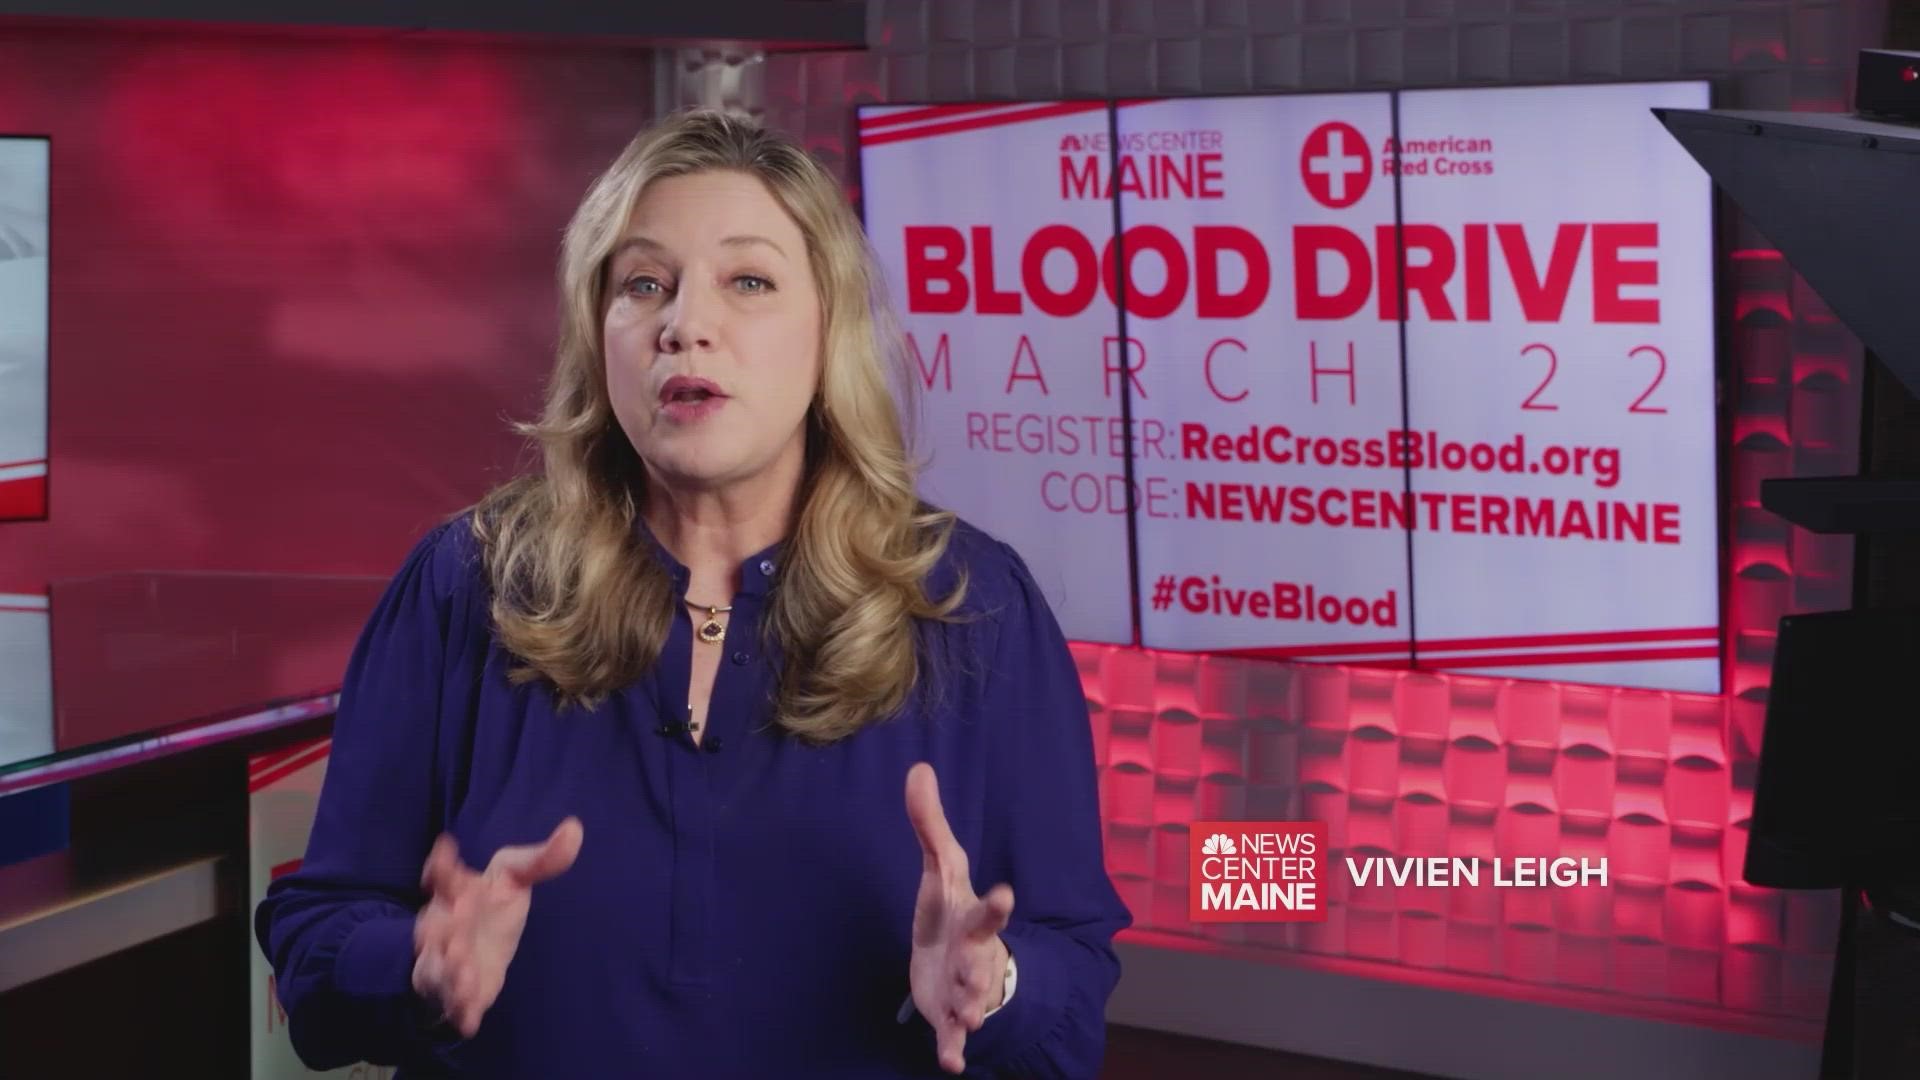 NEWS CENTER Maine is joining the Red Cross to help Mainers in need. You can help your fellow neighbors in need by donating blood on Wednesday, March 22.